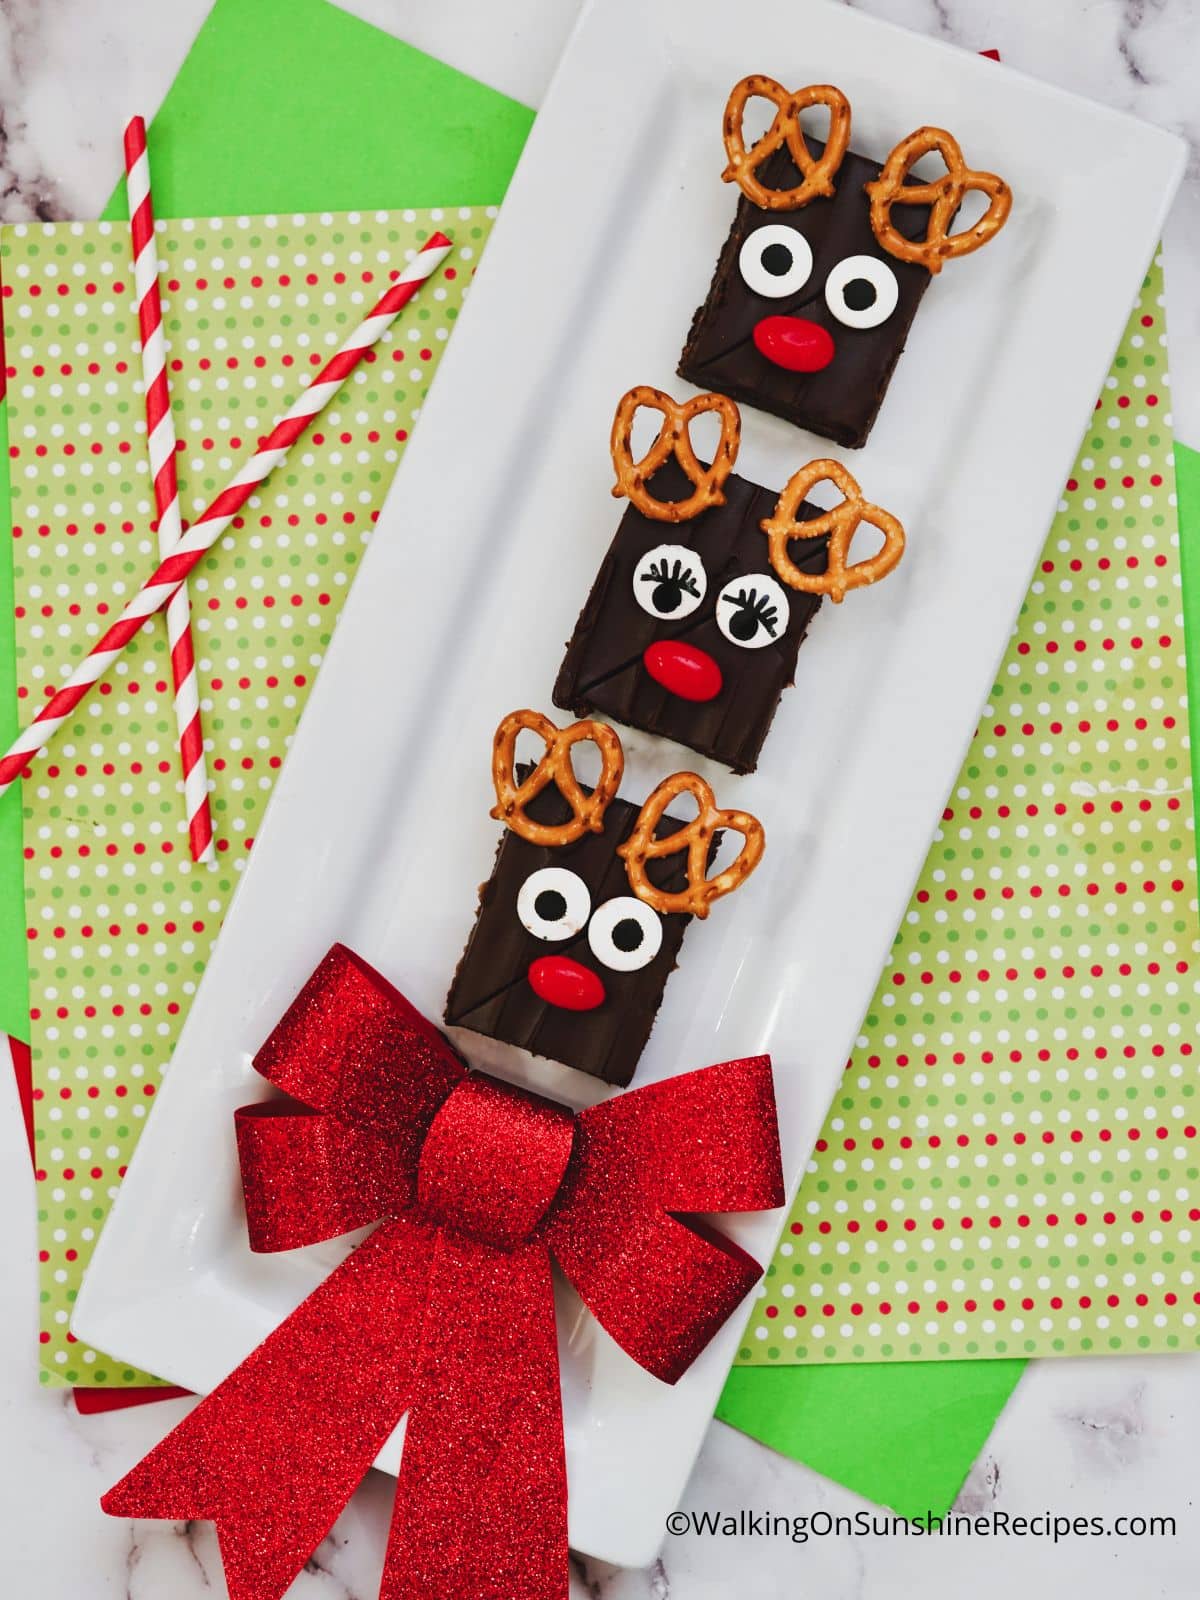 brownies decorated for Christmas like rudolph.